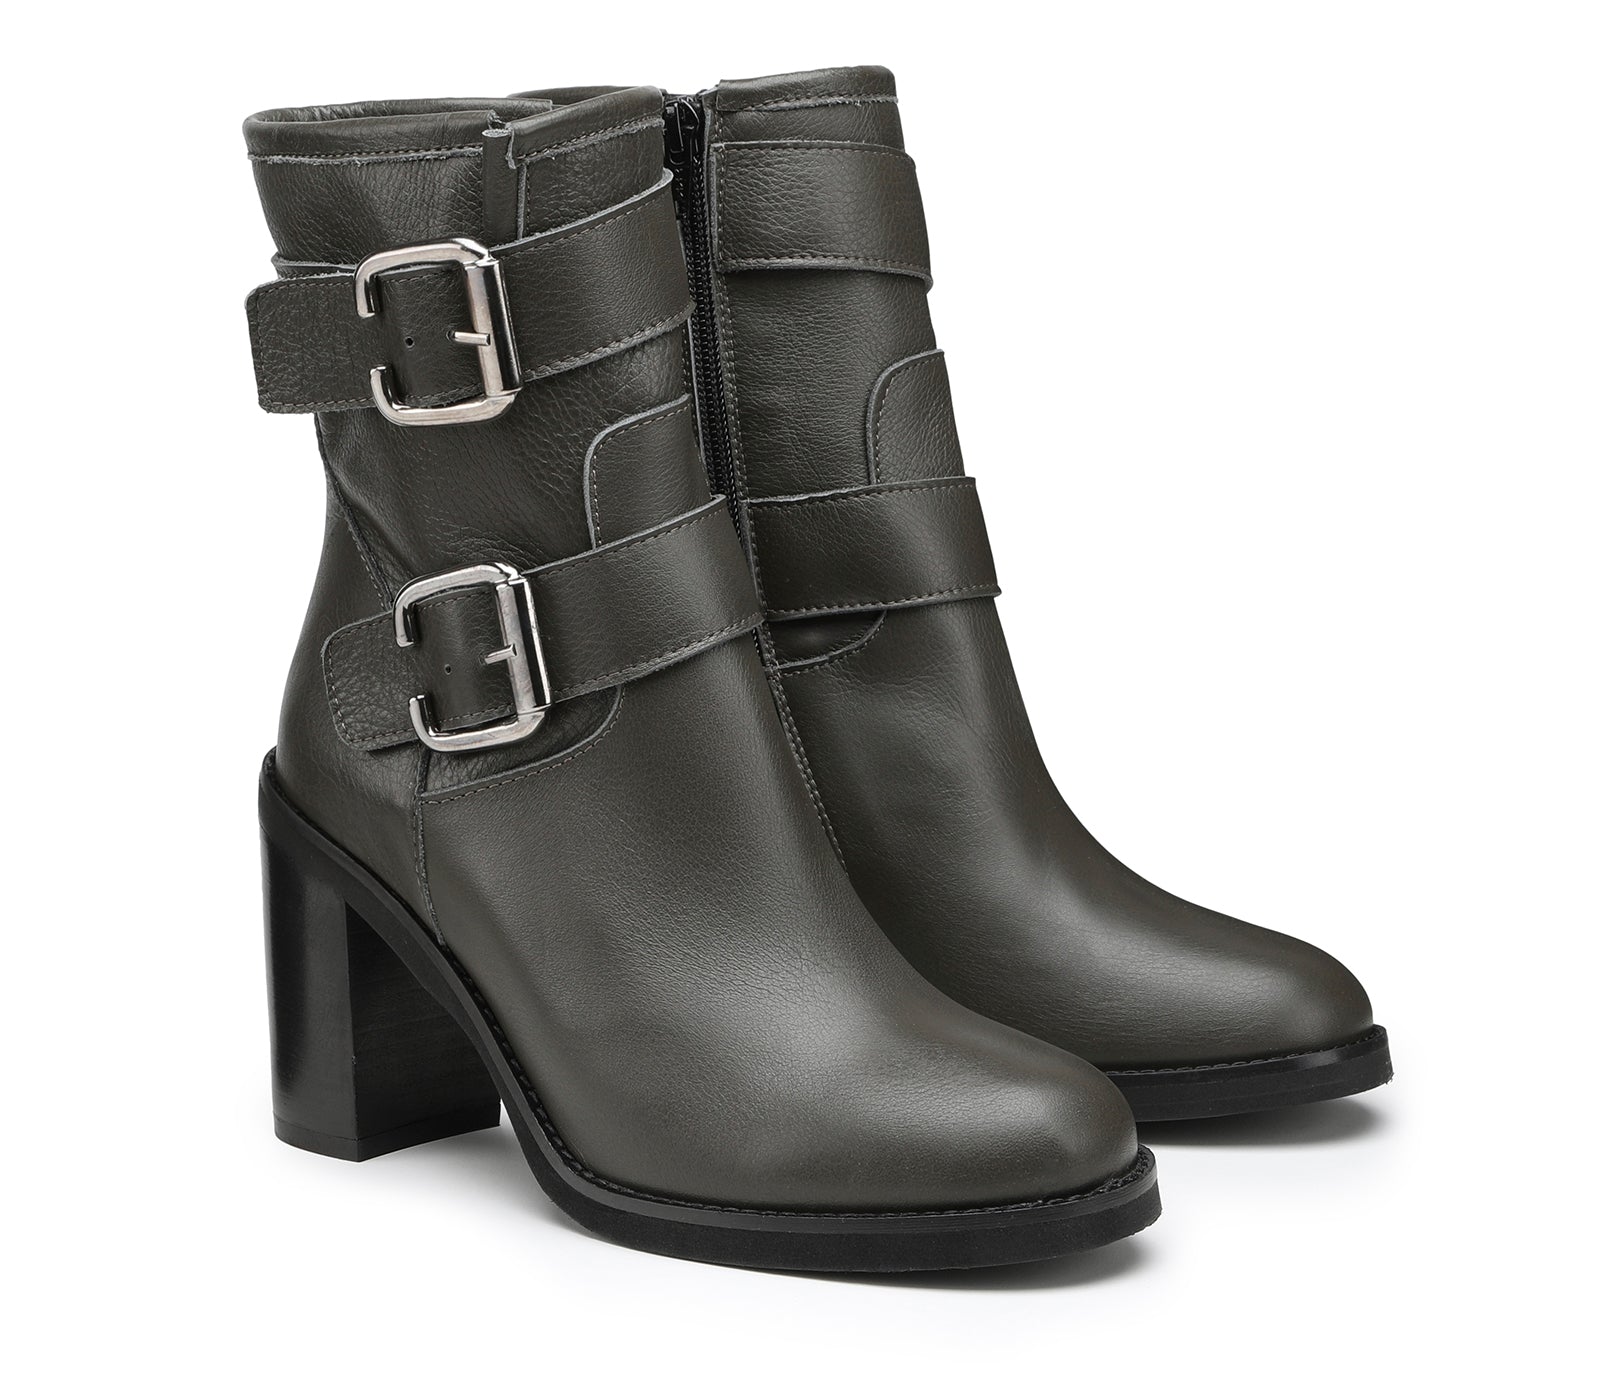 Grey Women's Ankle Boots with Wide Heels and Adjustable Straps